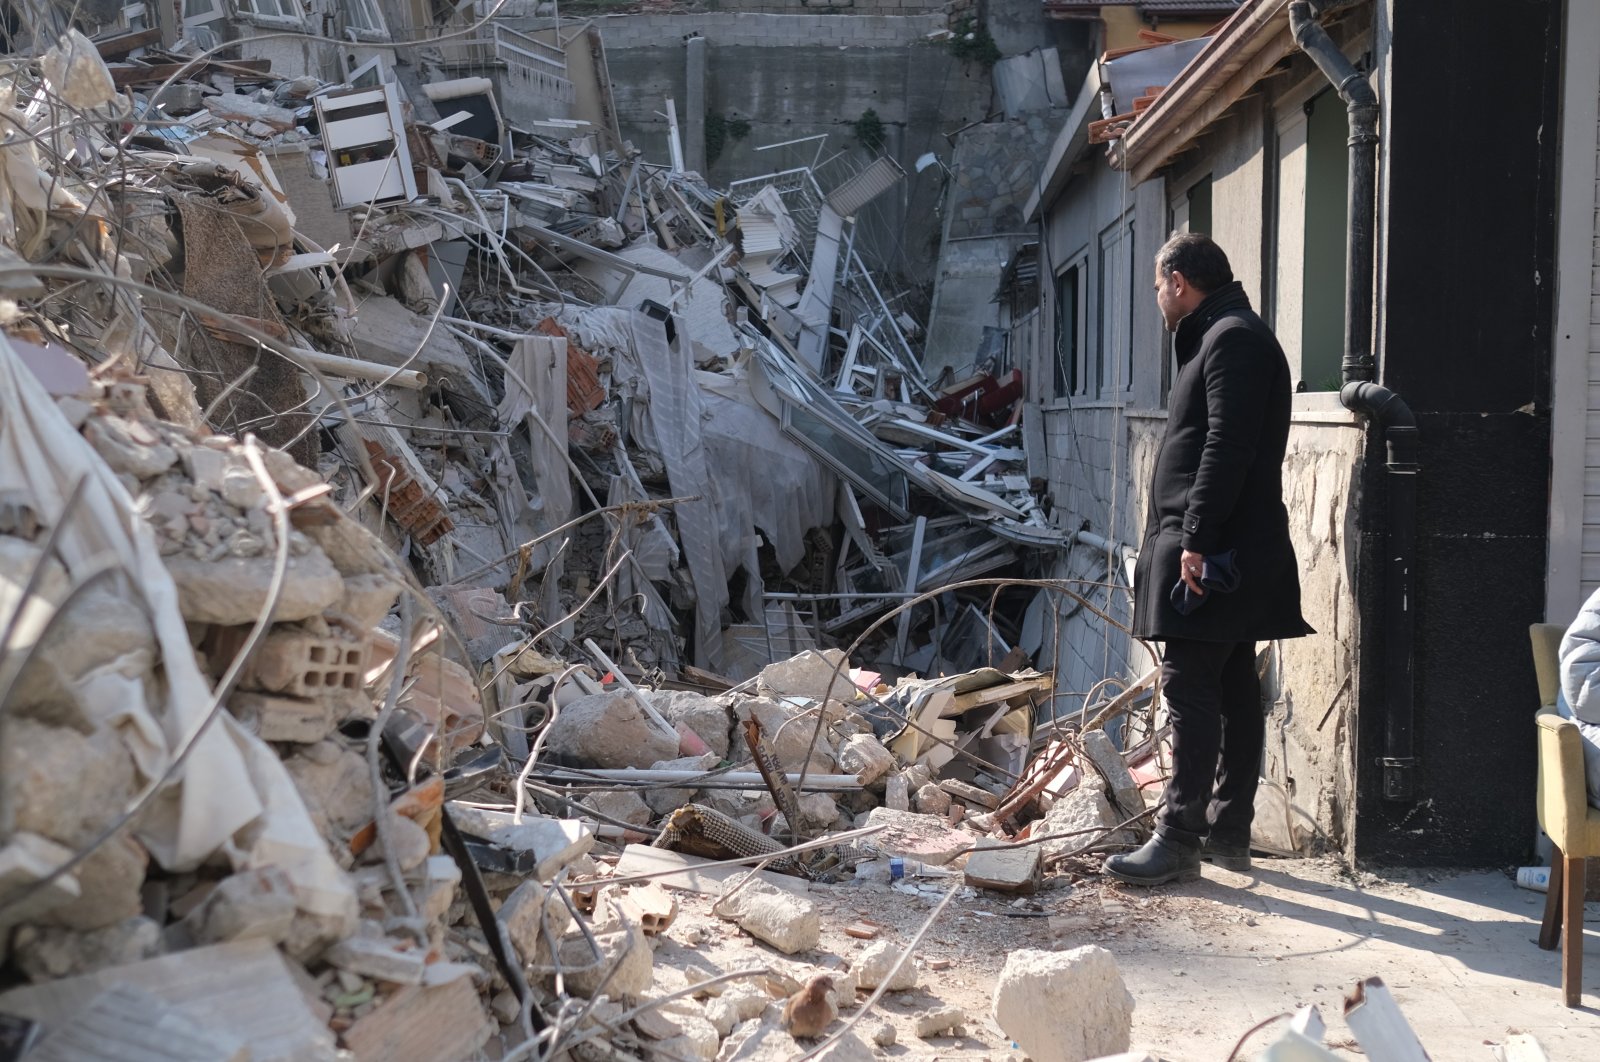 Idris Kan looks at the rubble he escaped from, in Hatay, southern Türkiye, Feb. 12, 2023. (IHA Photo)